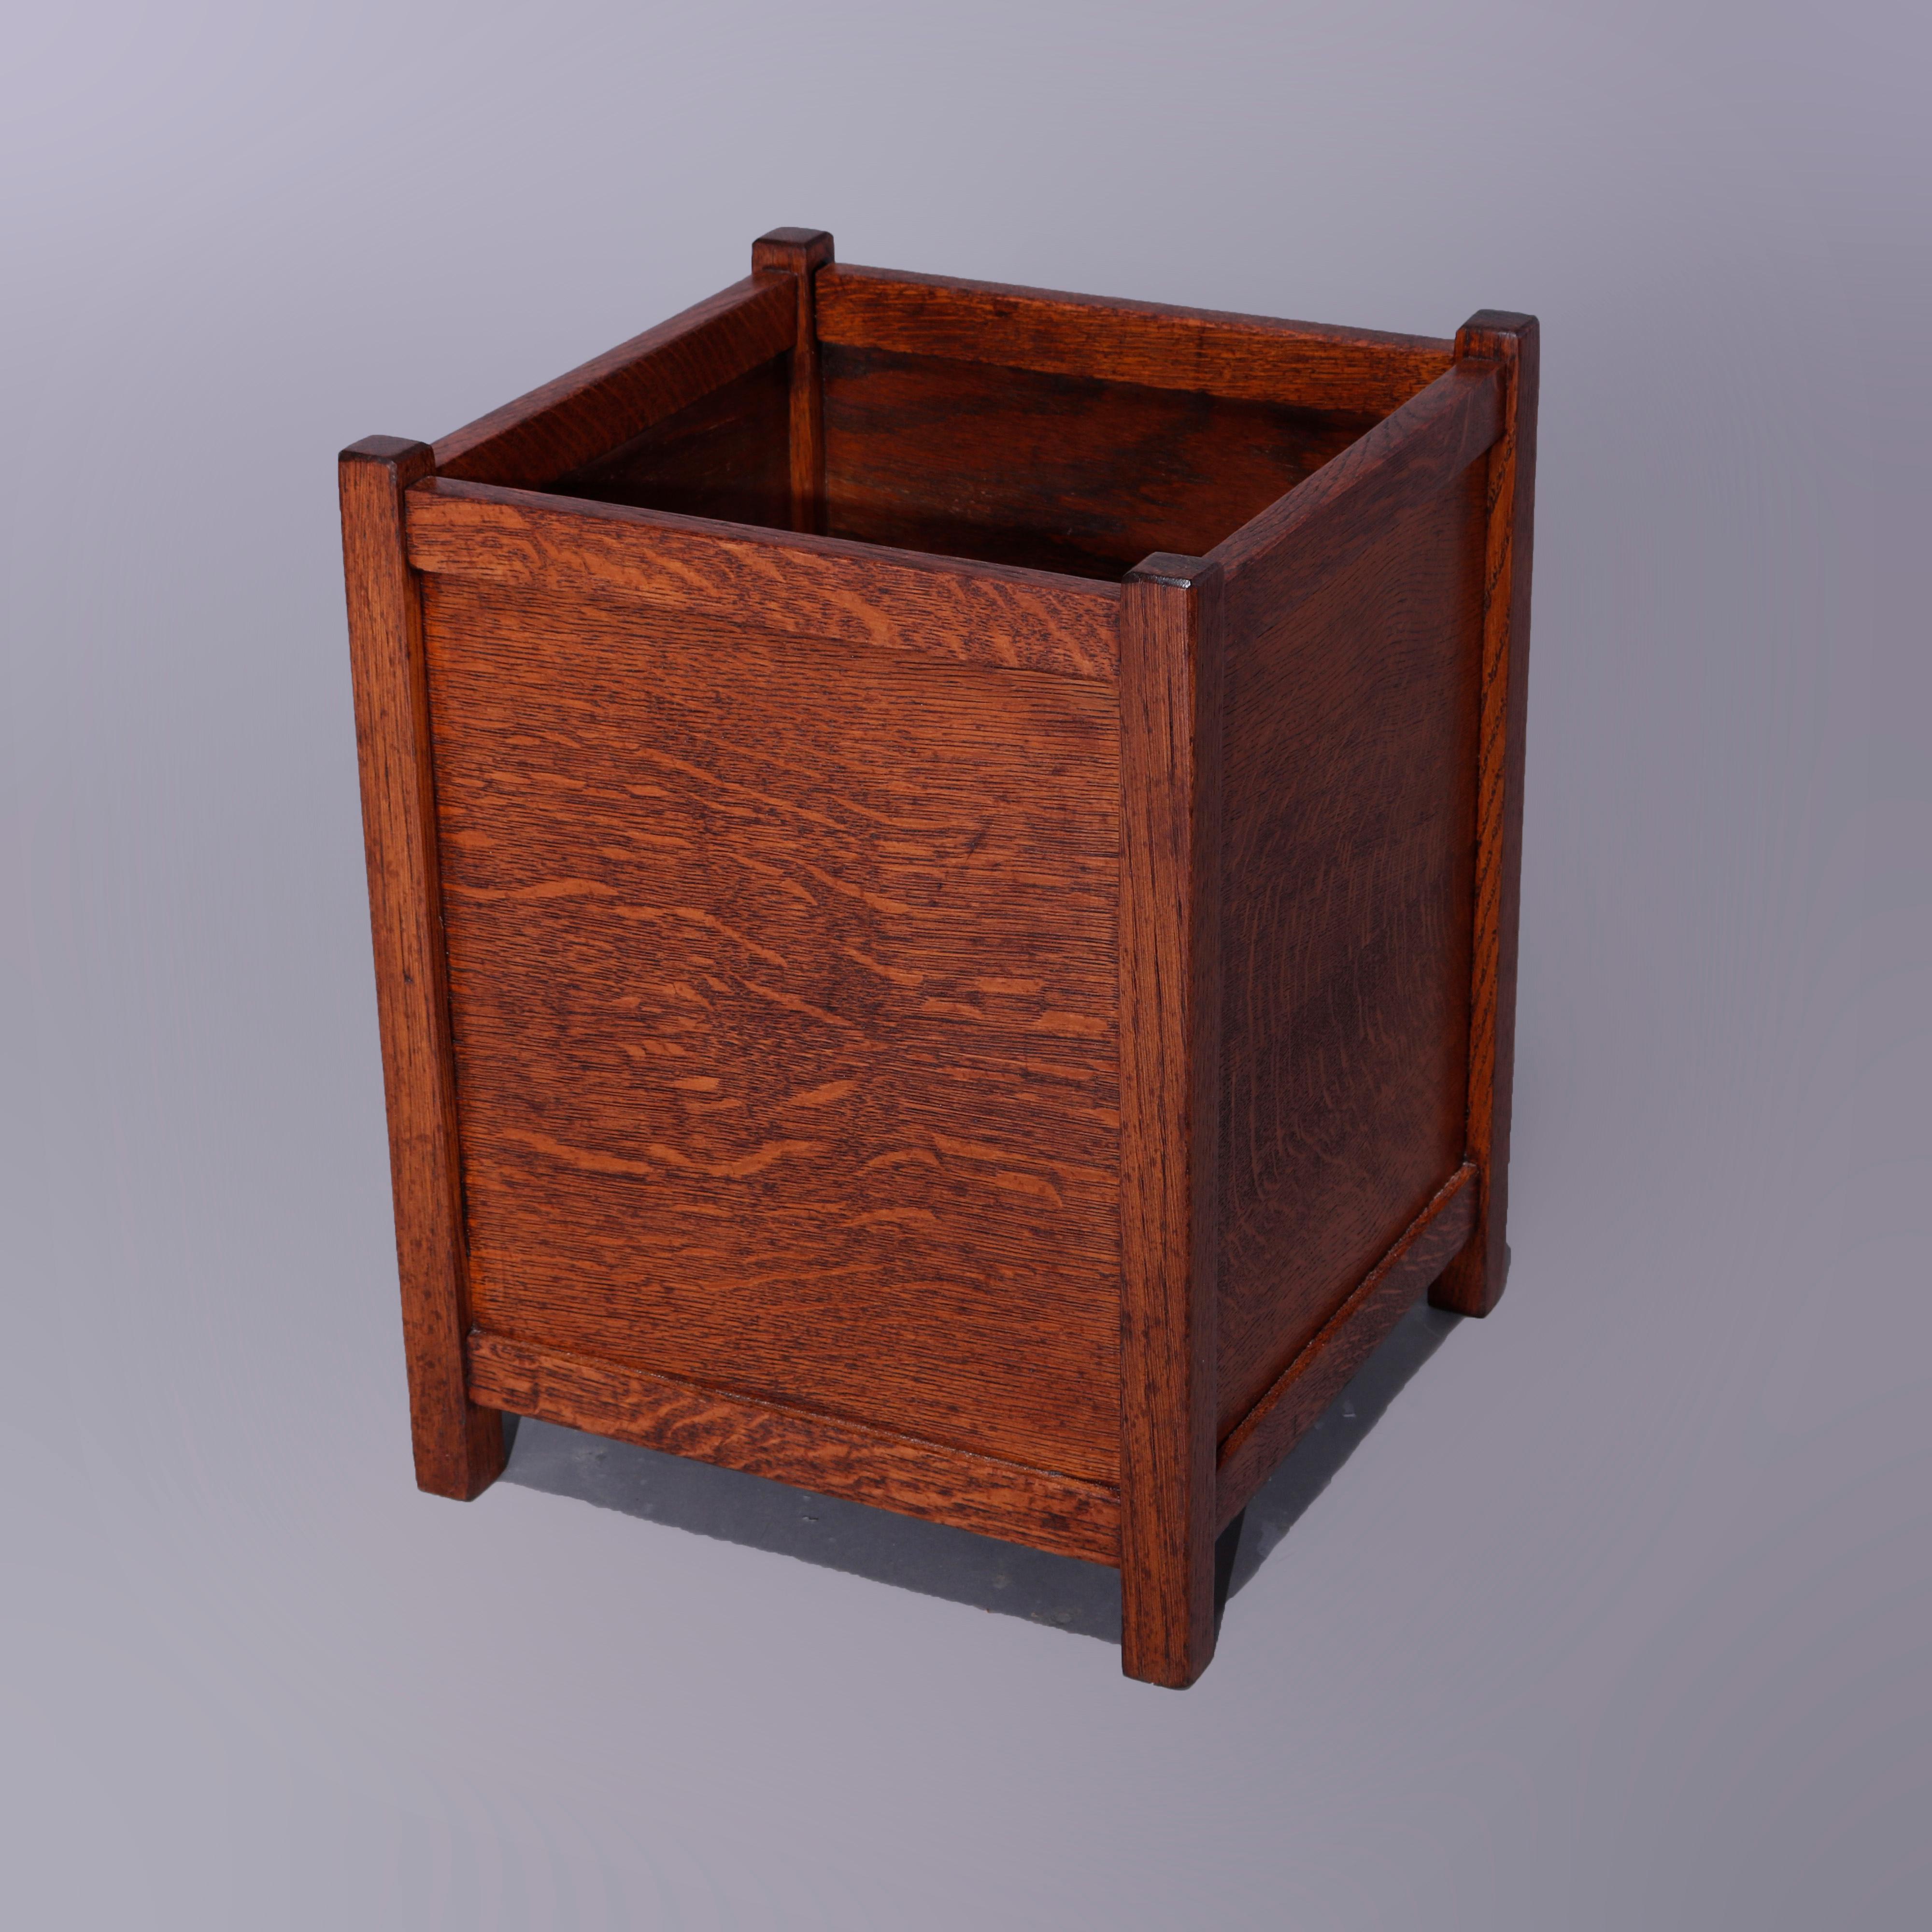 An antique Arts & Crafts waste basket in the manner of Stickley Brothers offers quarter sawn oak construction with four paneled sides raised on square and straight legs, c1910

Measures - 18'' H x 14'' W x 14'' D.